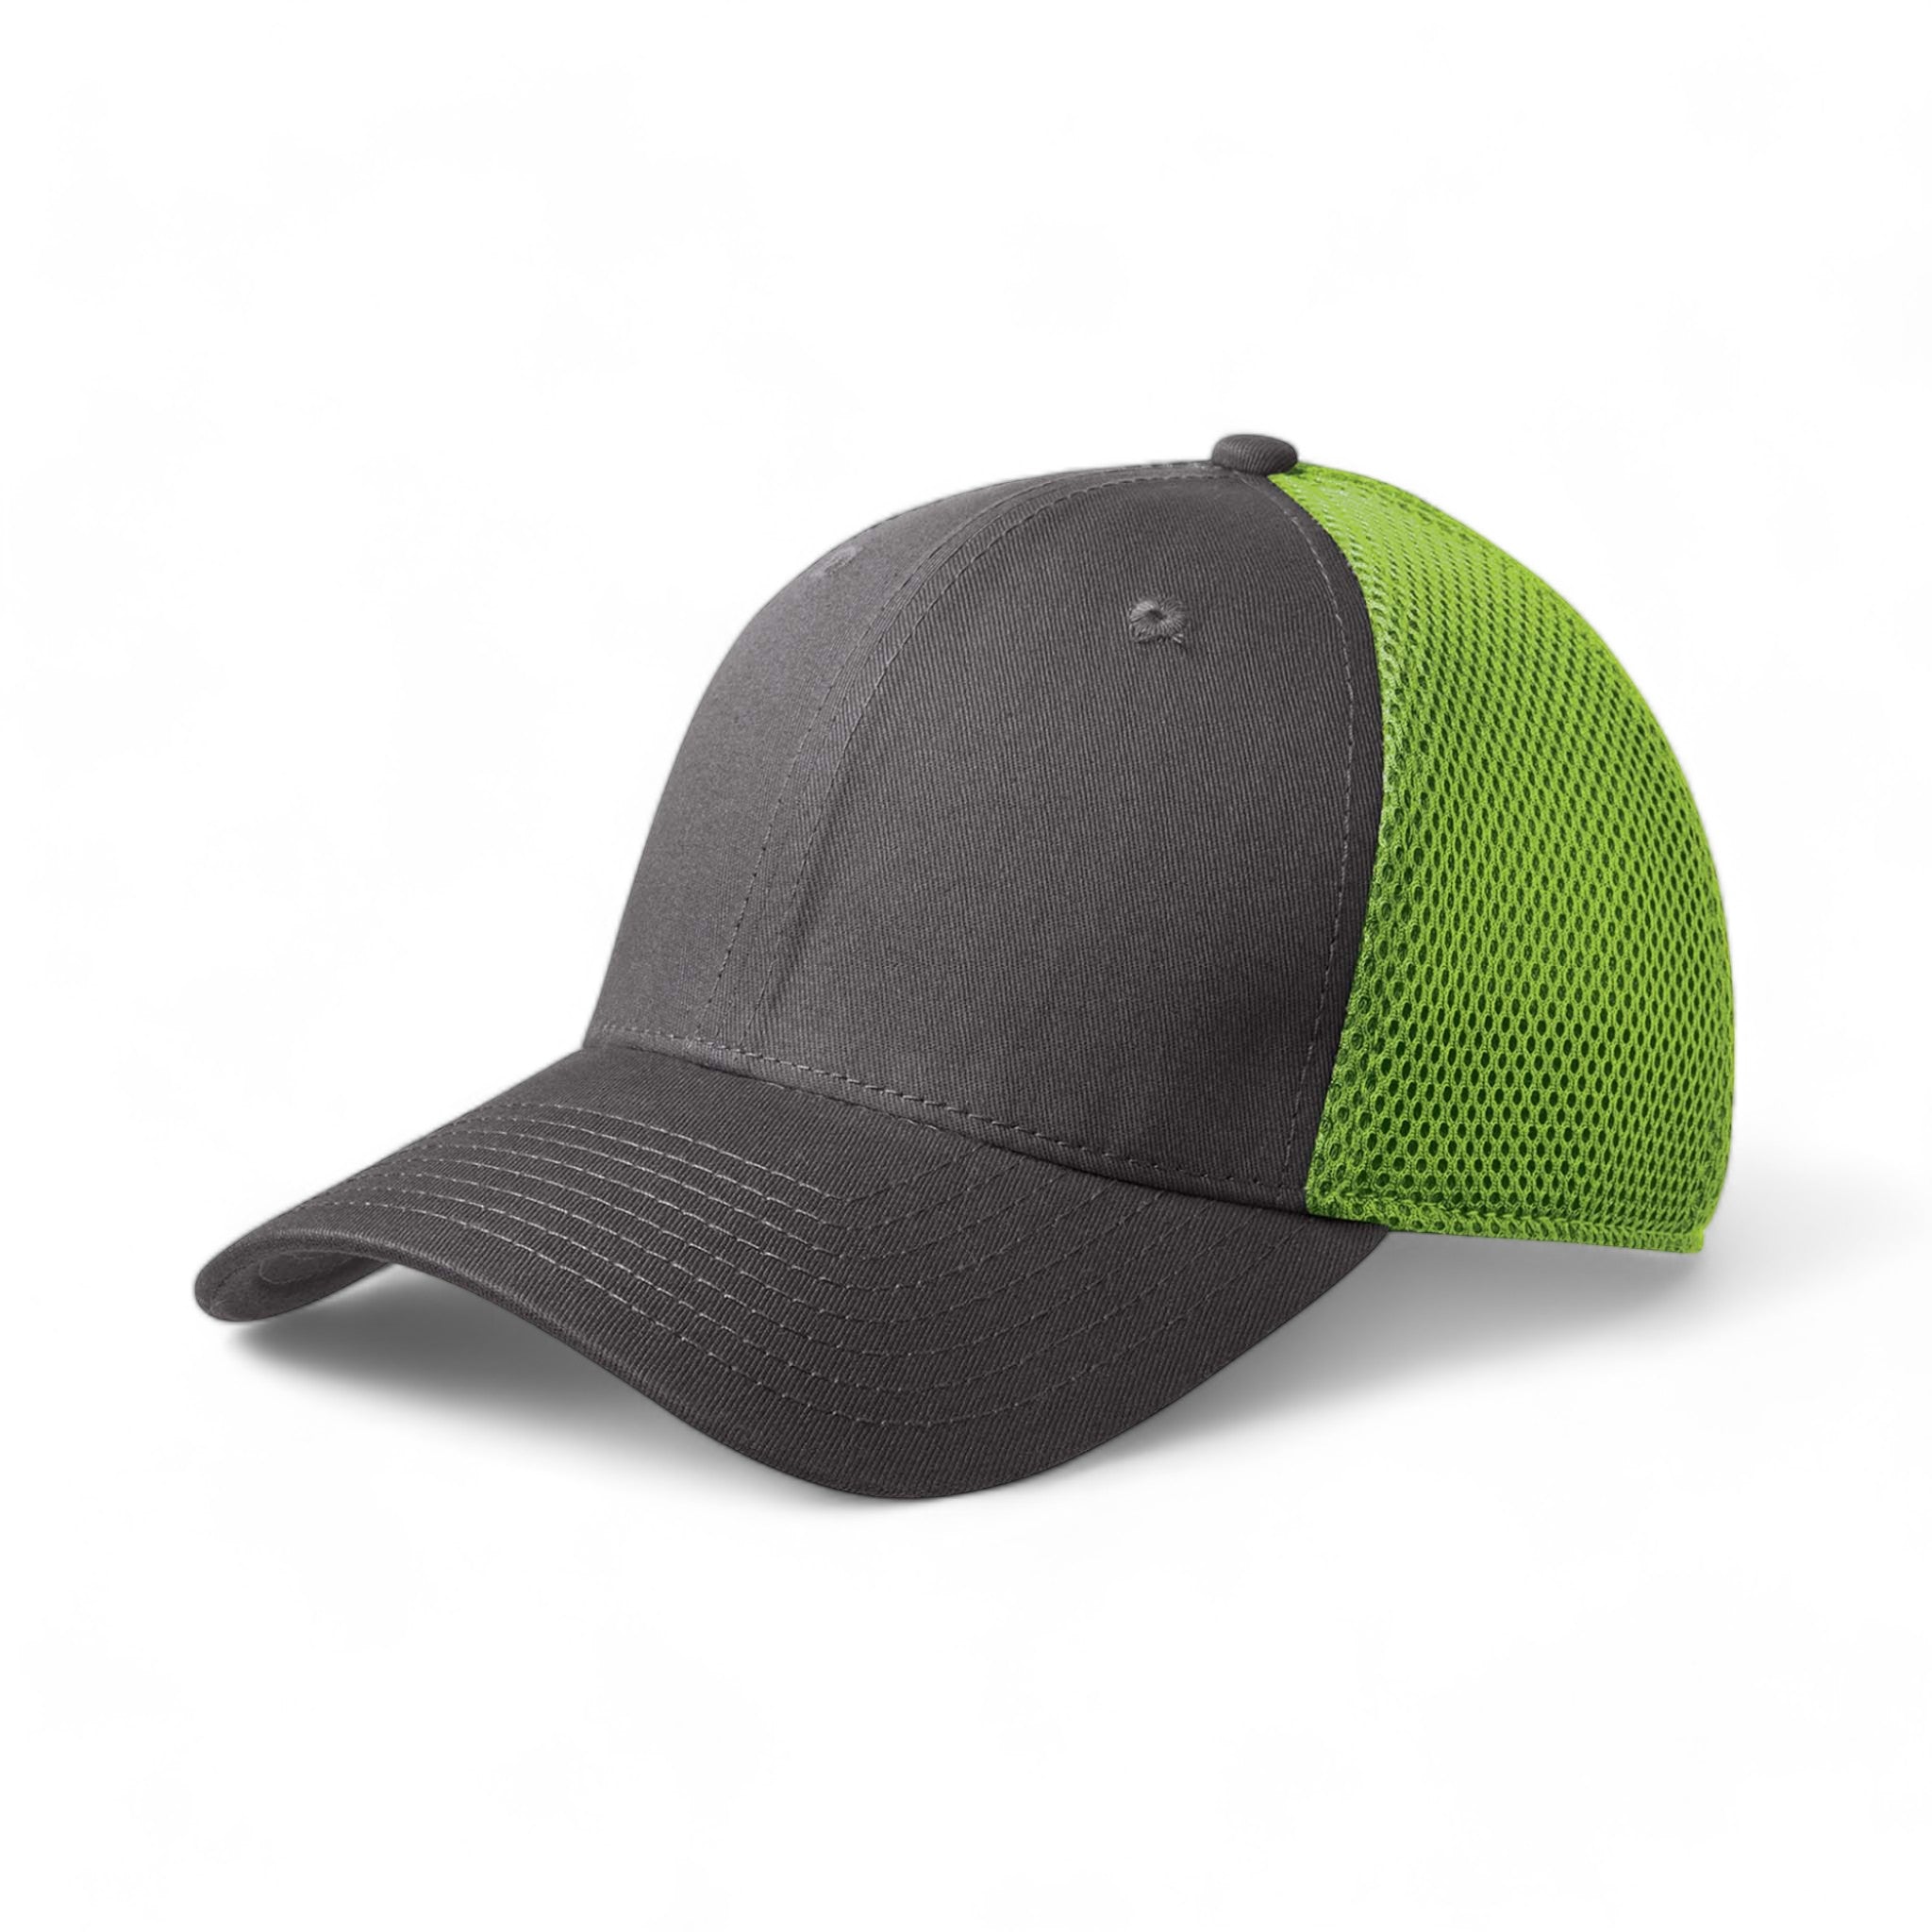 Side view of New Era NE1020 custom hat in graphite and cyber green